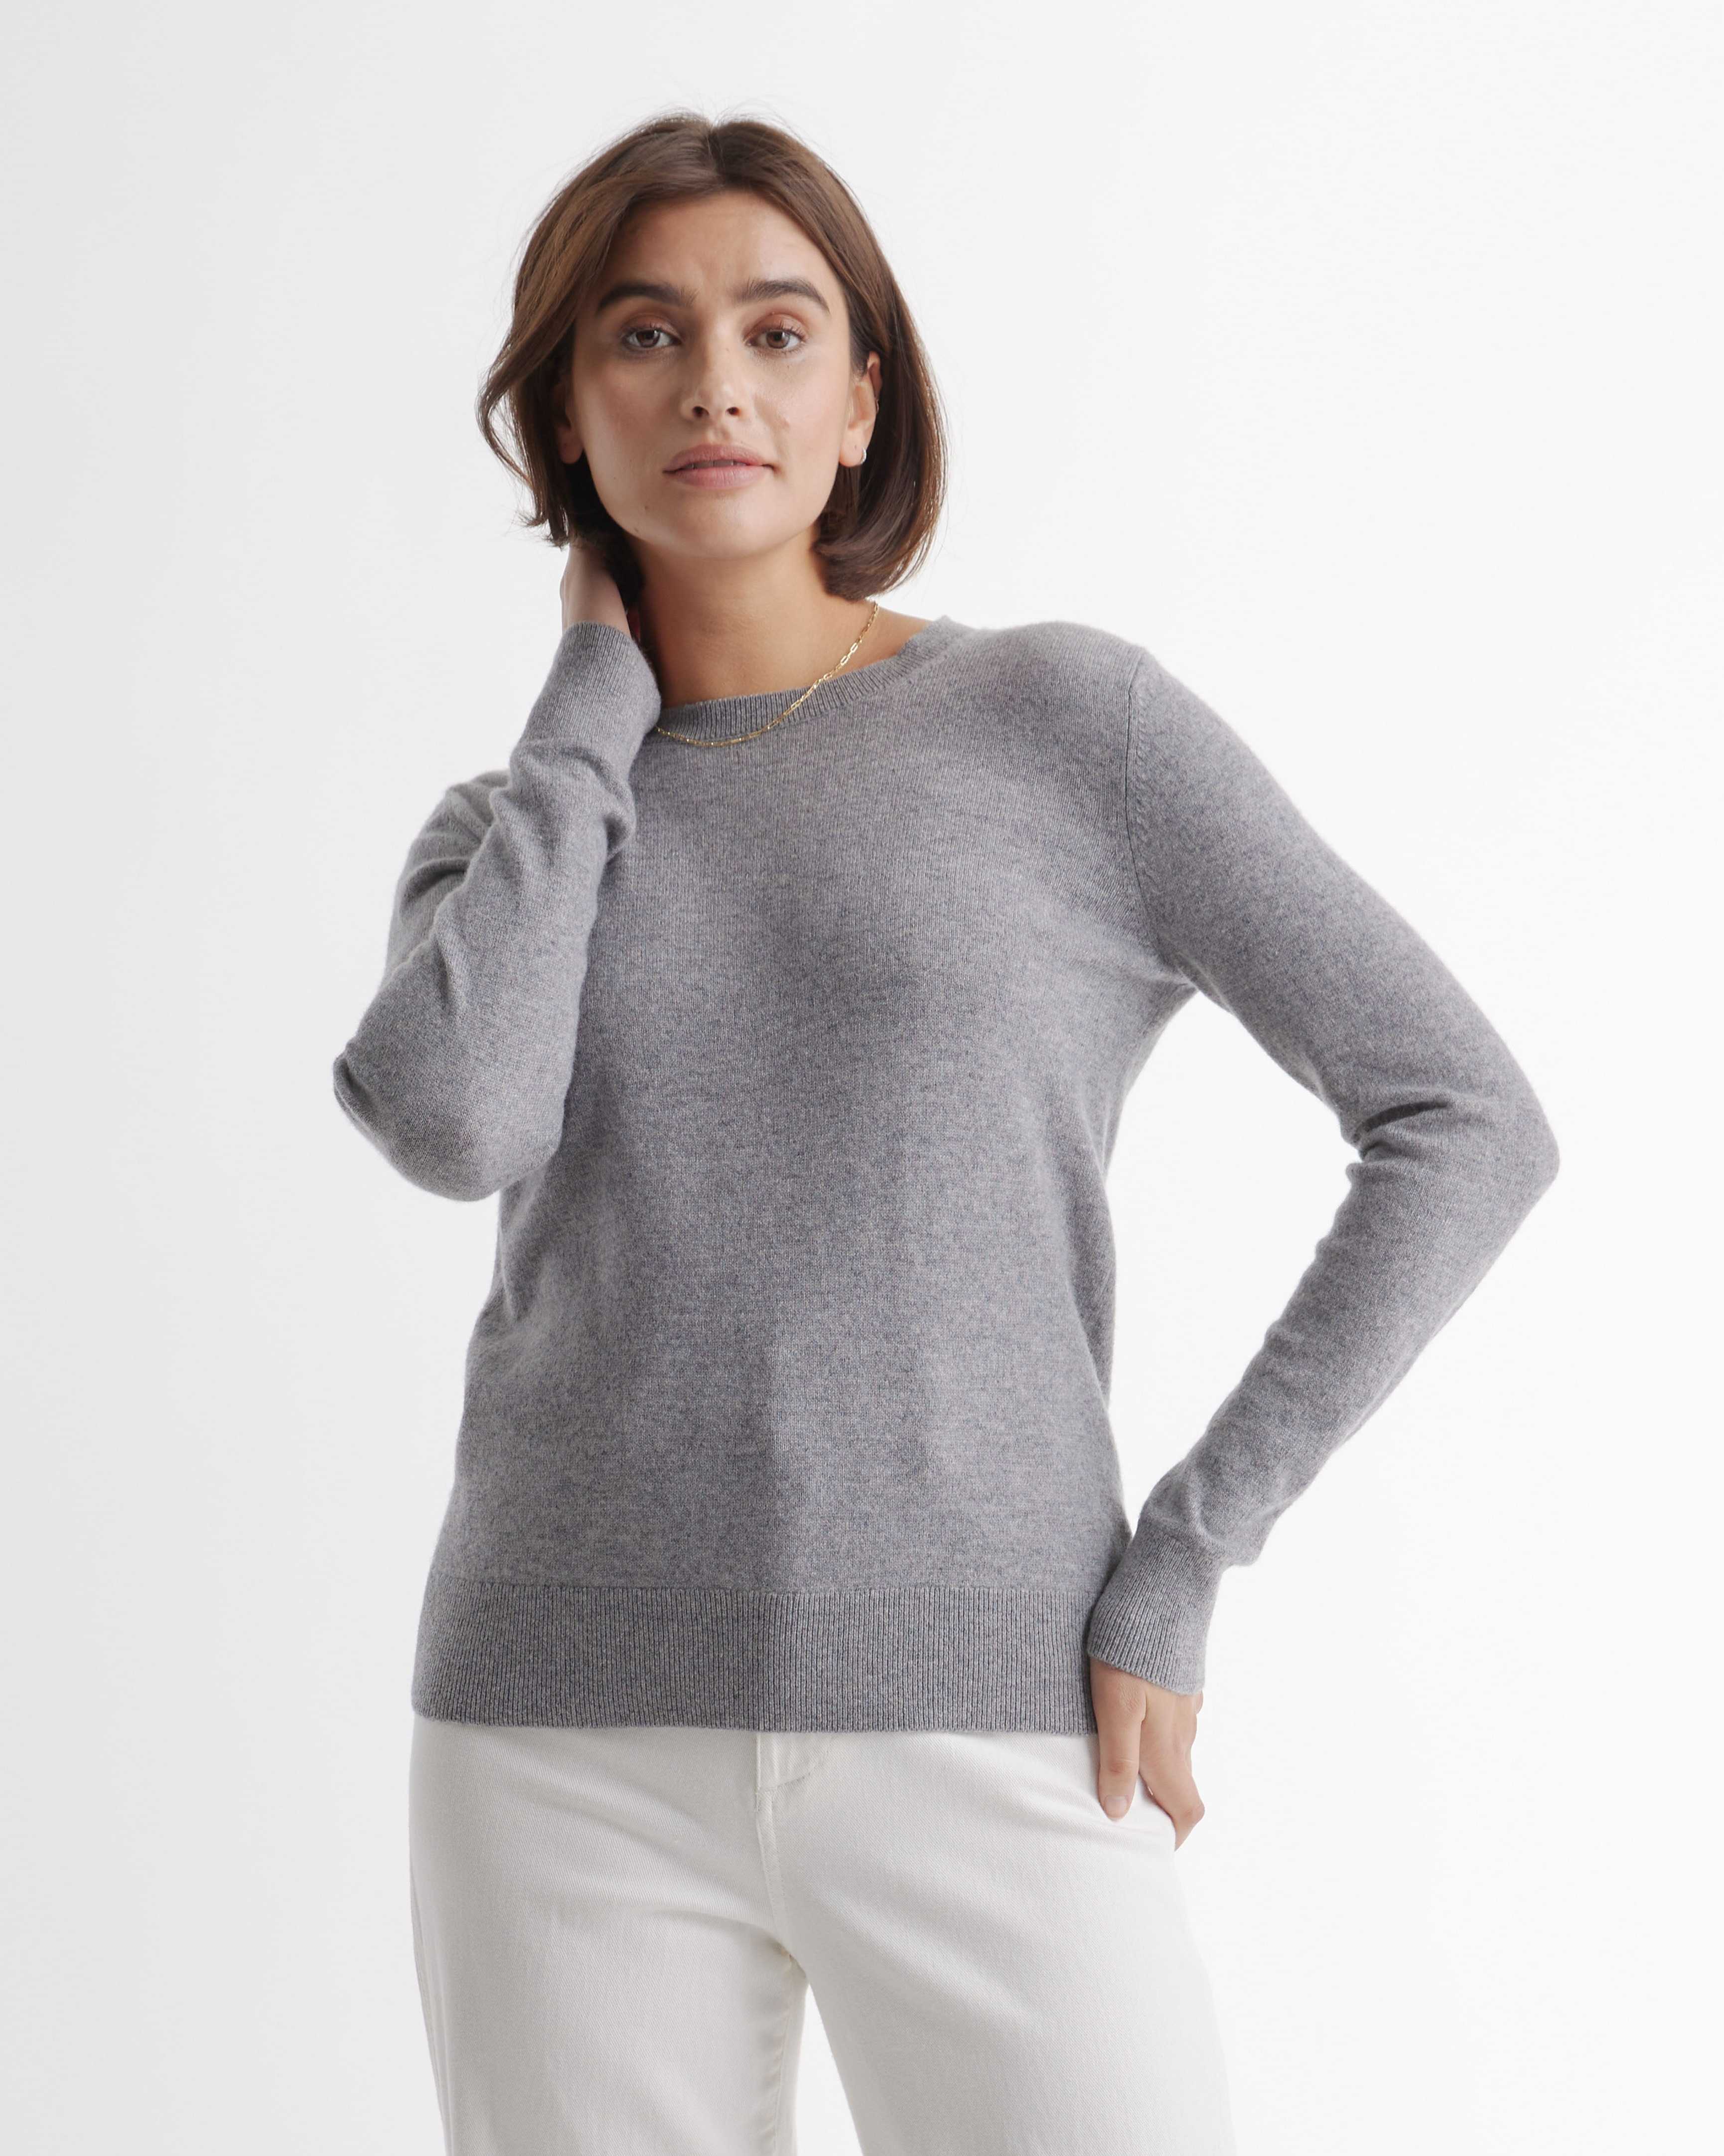 Quince's Cashmere Fisherman Sweater Is Cozy and Affordable